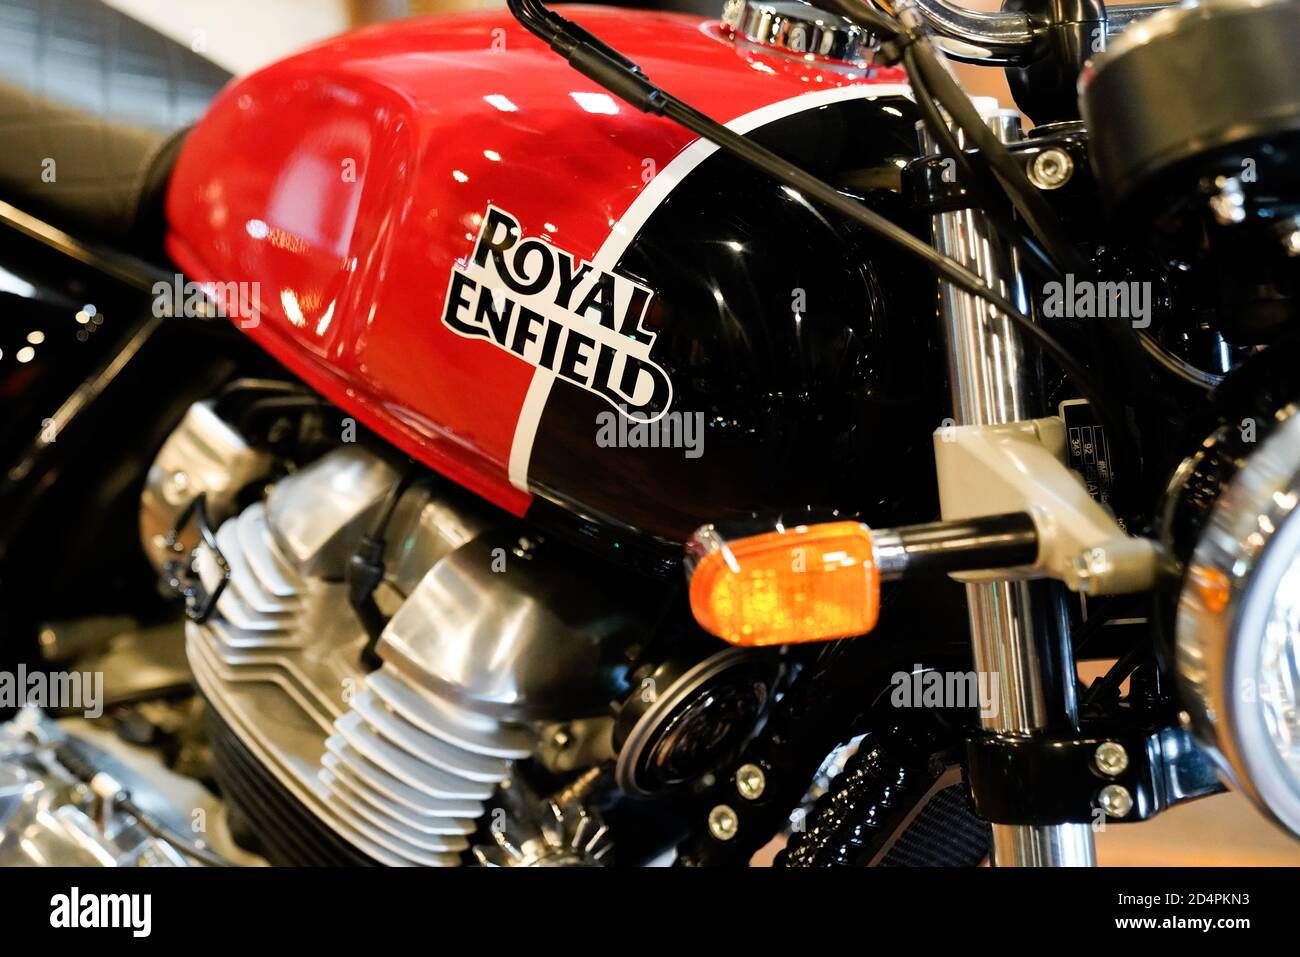 Bordeaux , Aquitaine / France - 10 01 2020 : Royal Enfield logo and sign text on motorcycle fuel tank of vintage motorbike Stock Photo